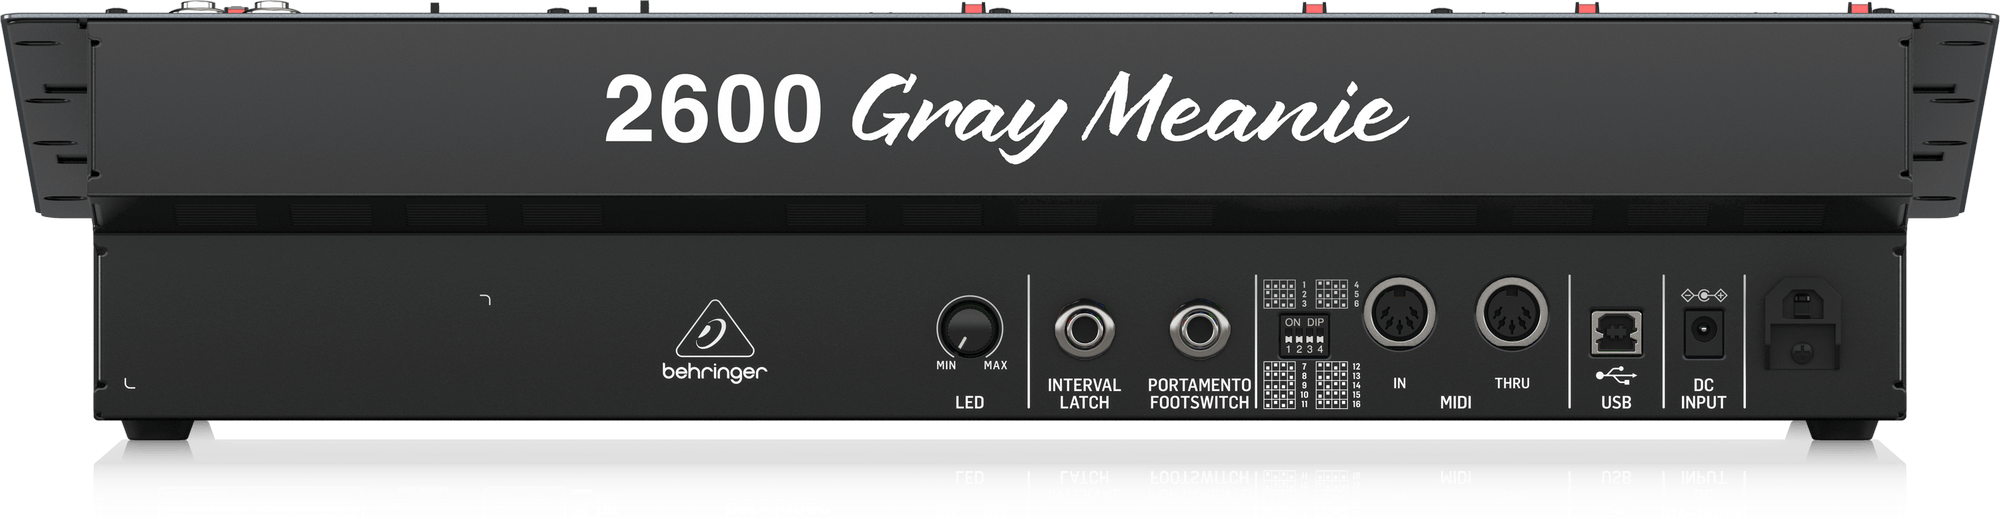 2600 GRAY MEANIE - 製品一覧 - ベリンガー公式ホームページ